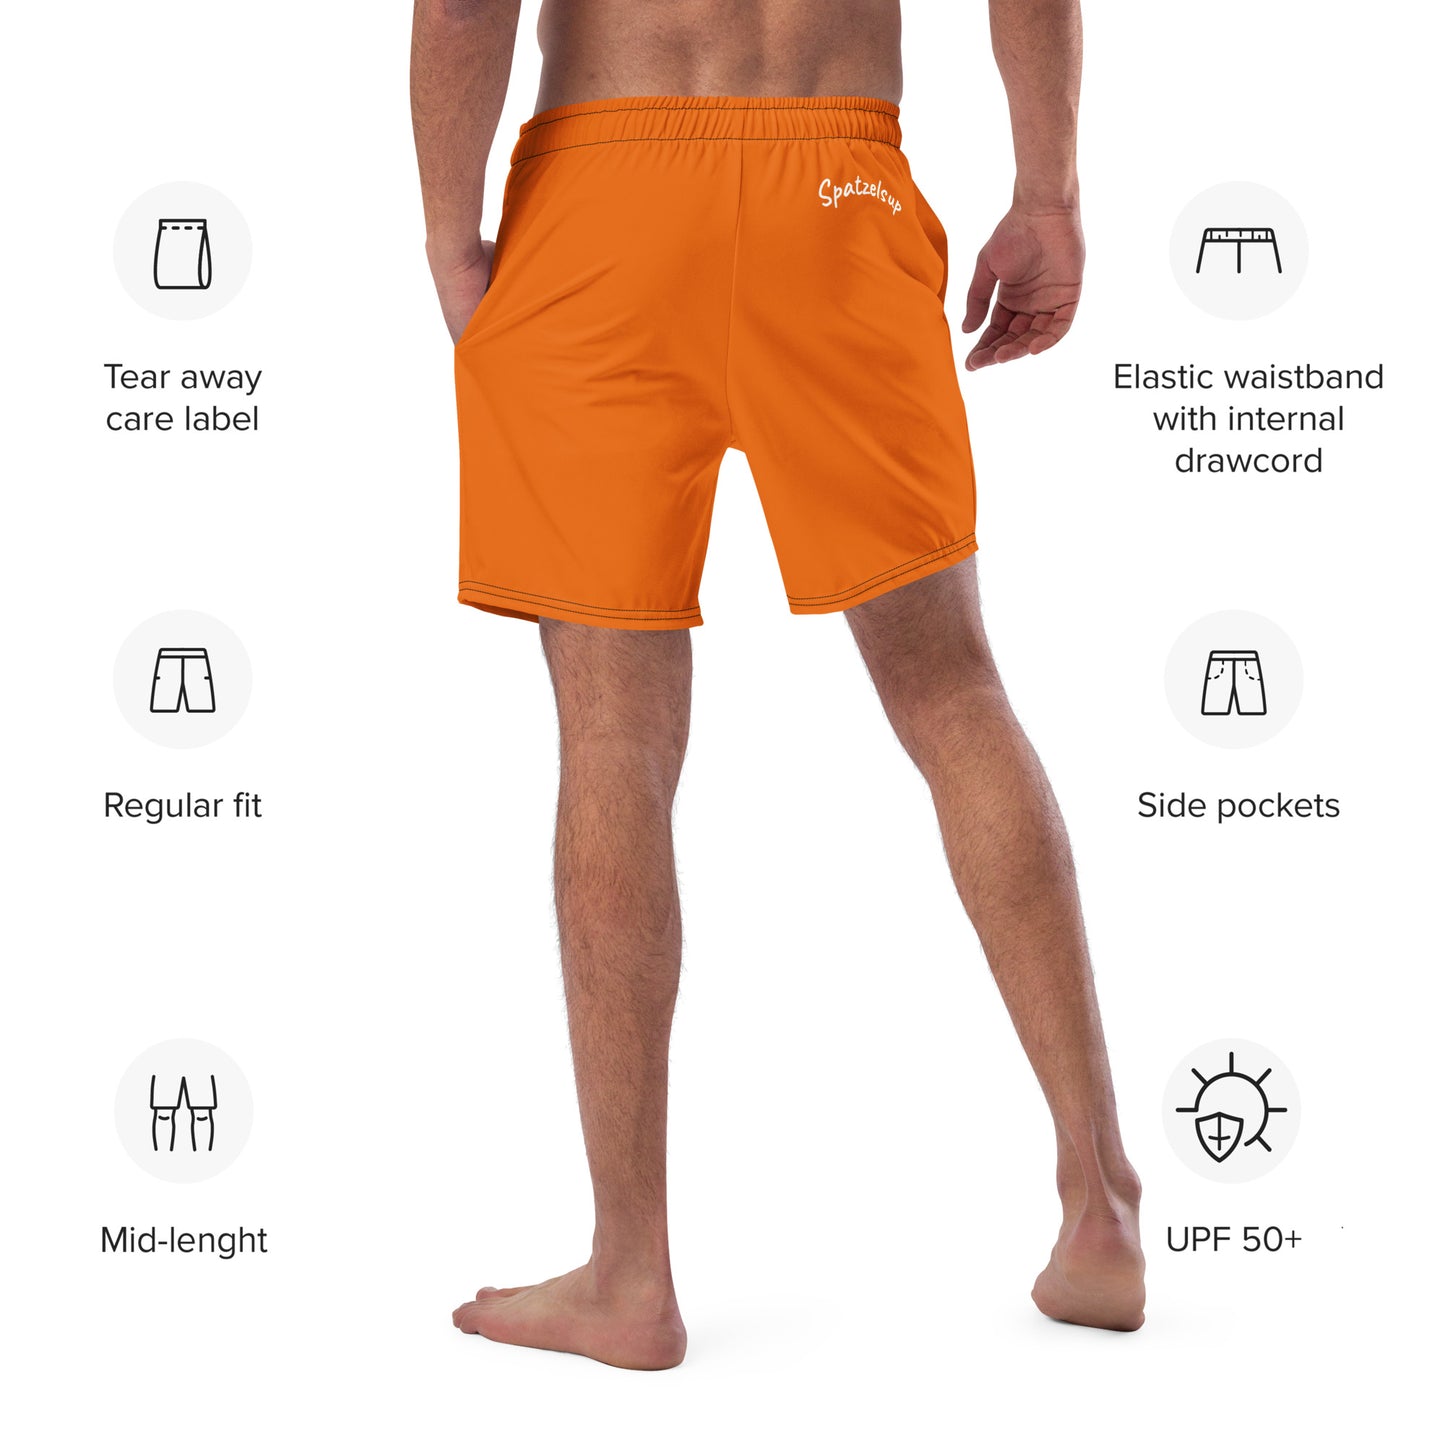 SUP Catch it-if you can Herren-Boardshorts